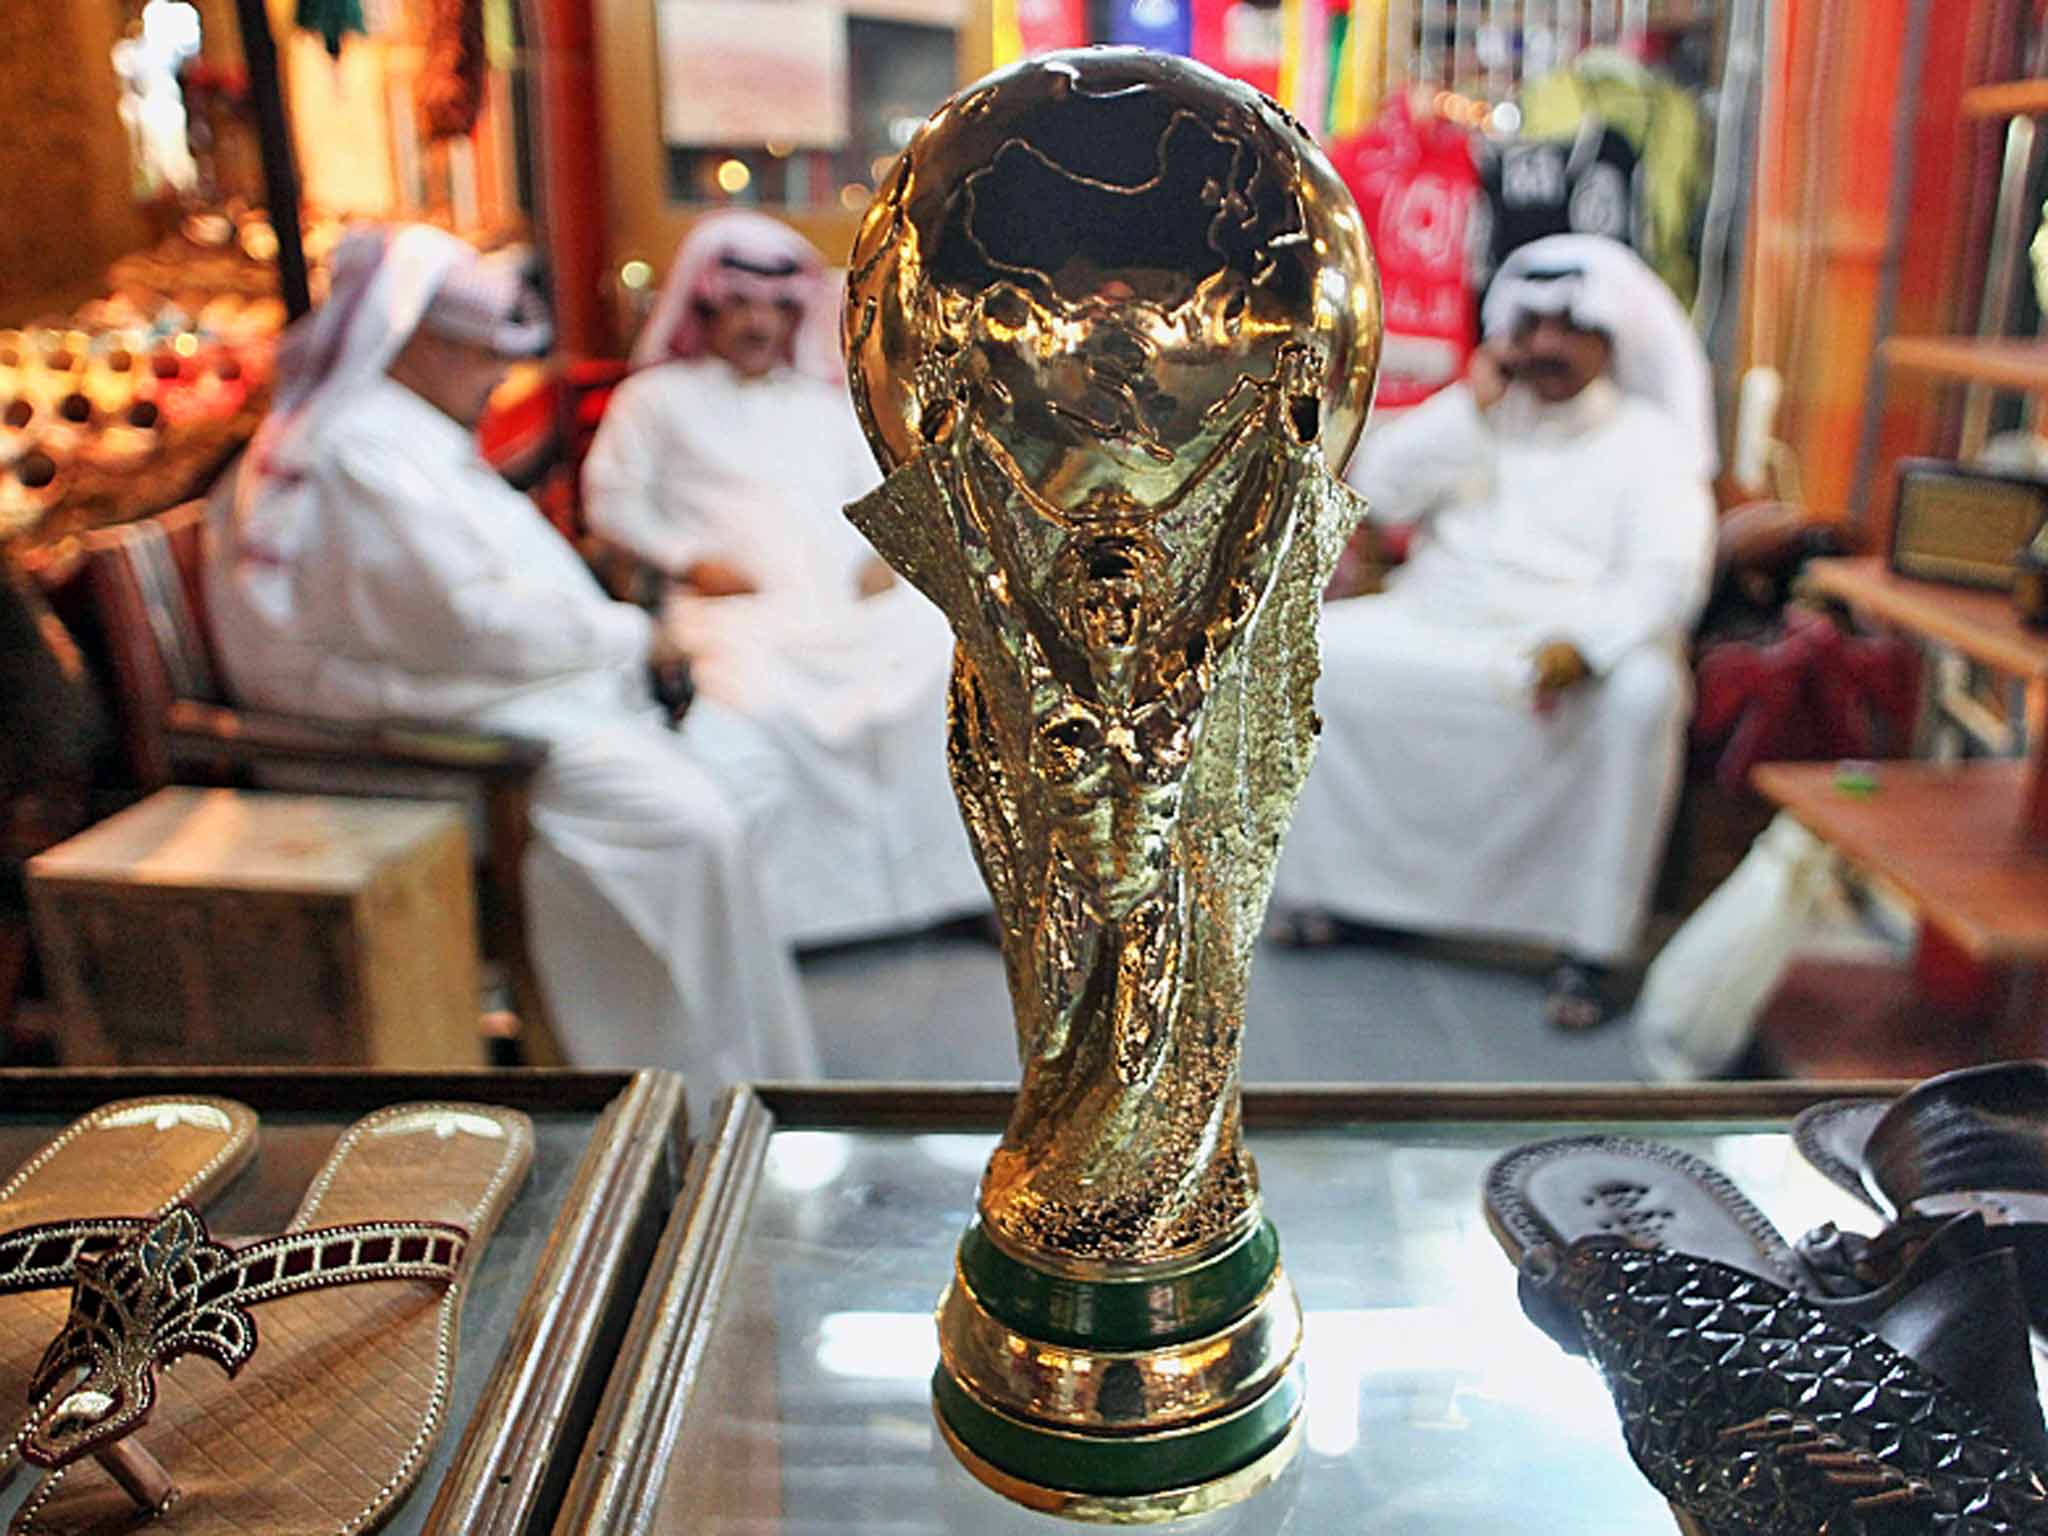 Seasons greetings: the award to Qatar of the 2022 World Cup could disrupt Christmas and New Year travel